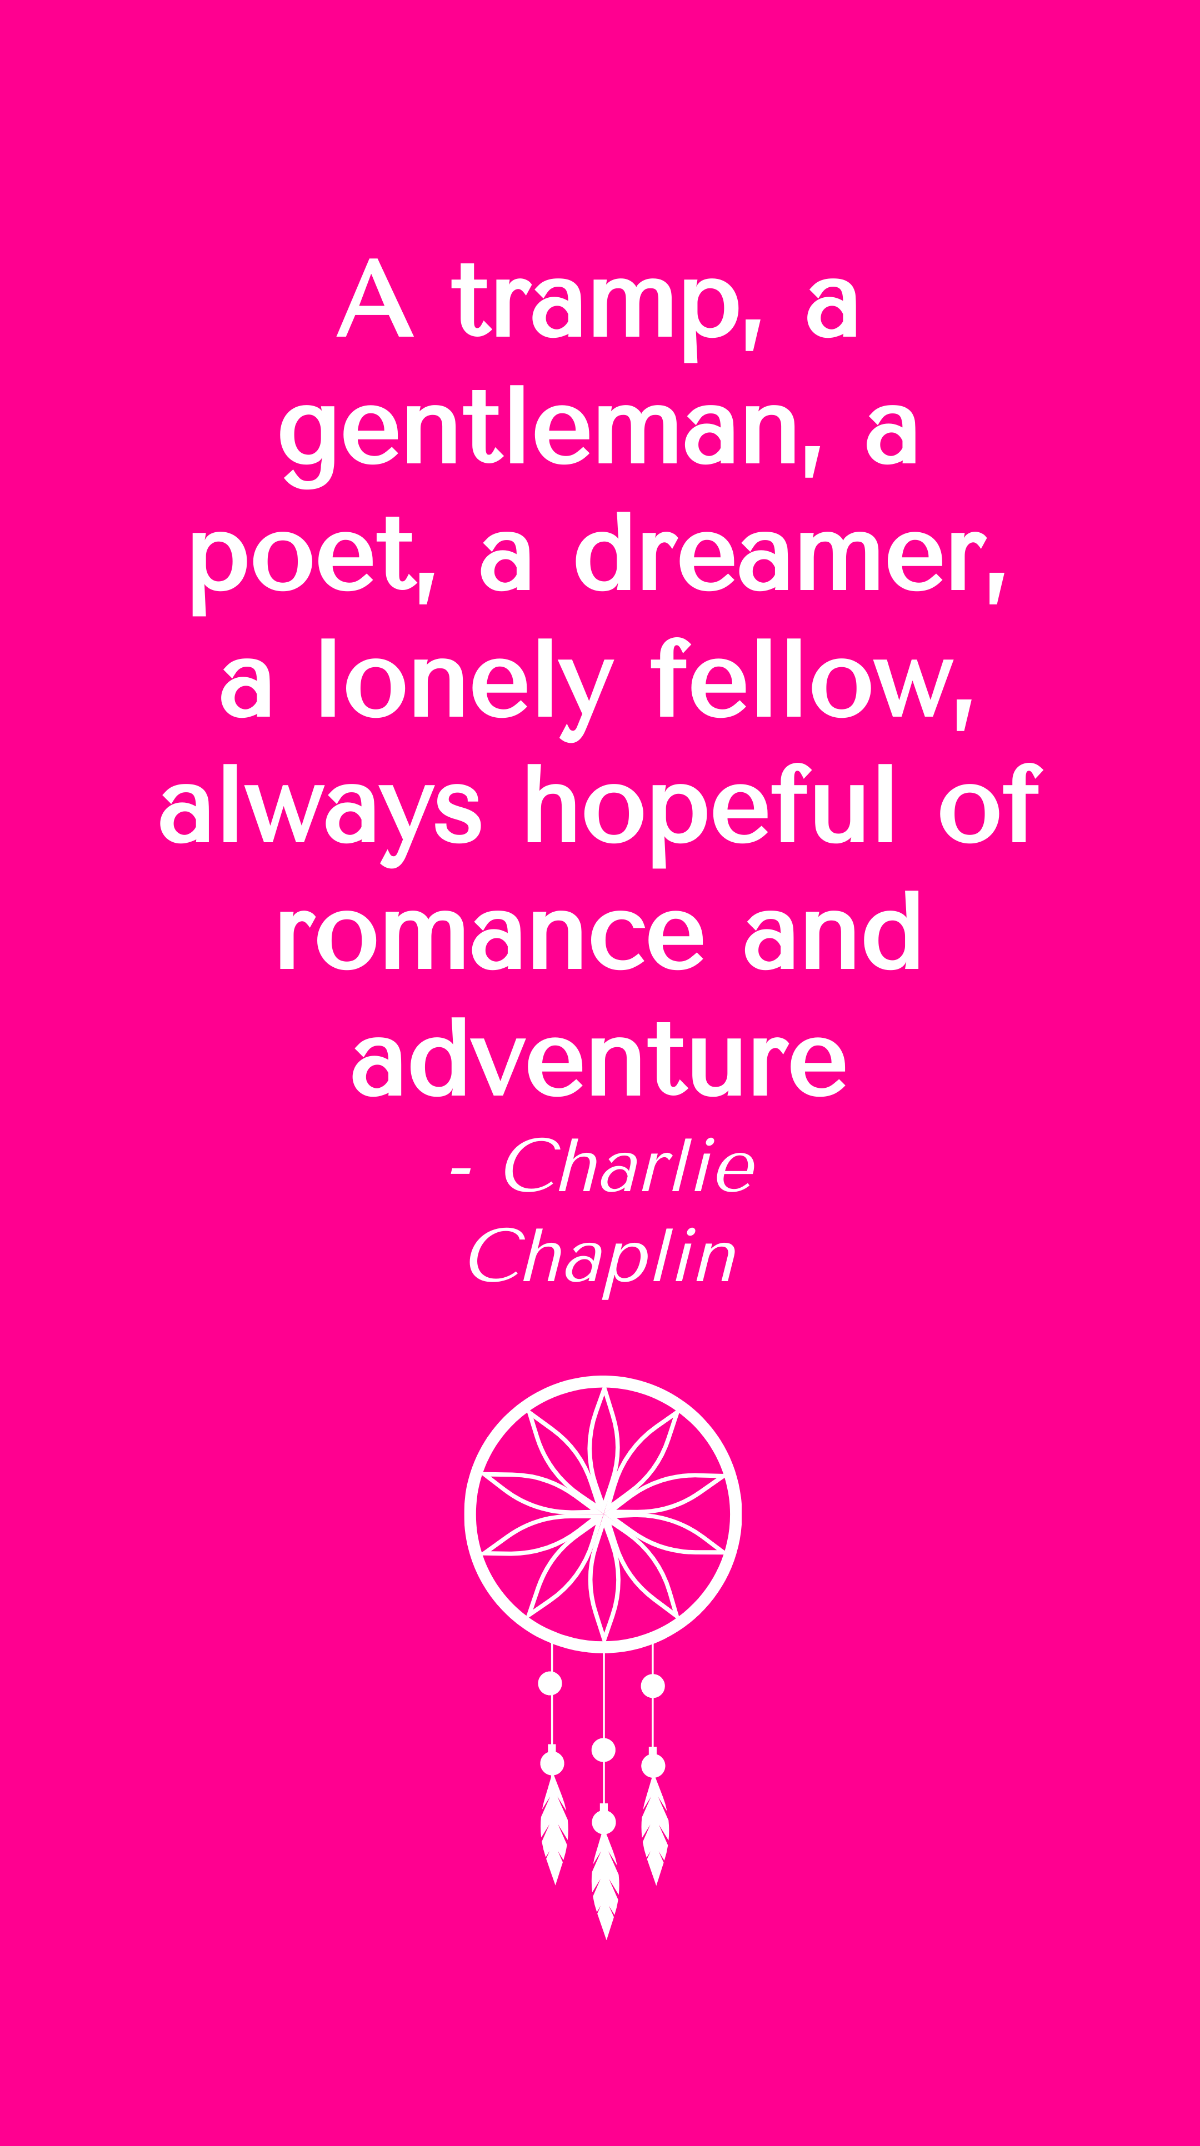 Charlie Chaplin - A tramp, a gentleman, a poet, a dreamer, a lonely fellow, always hopeful of romance and adventure